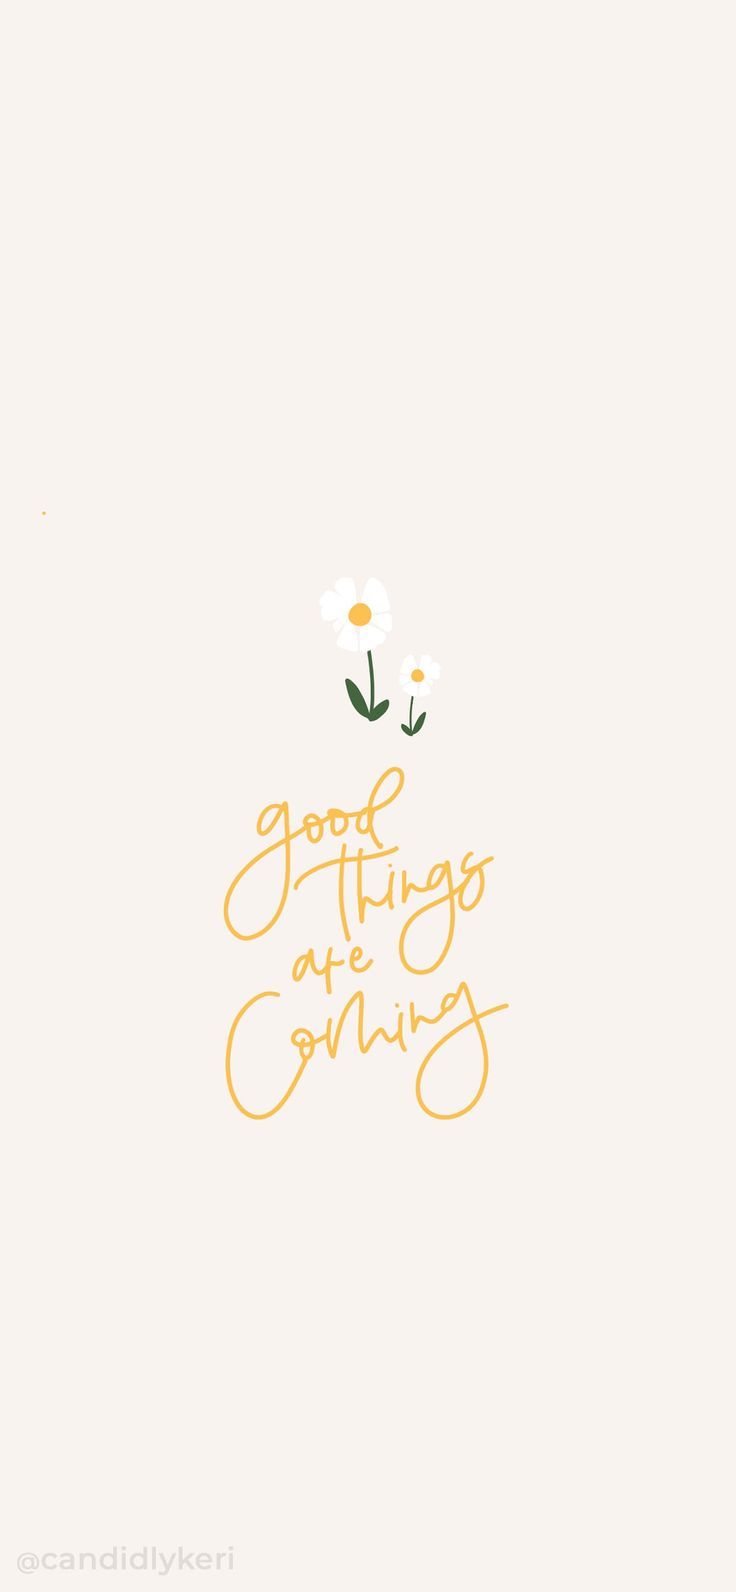 Good things are coming phone wallpaper you can download for free on the blog! - IPad